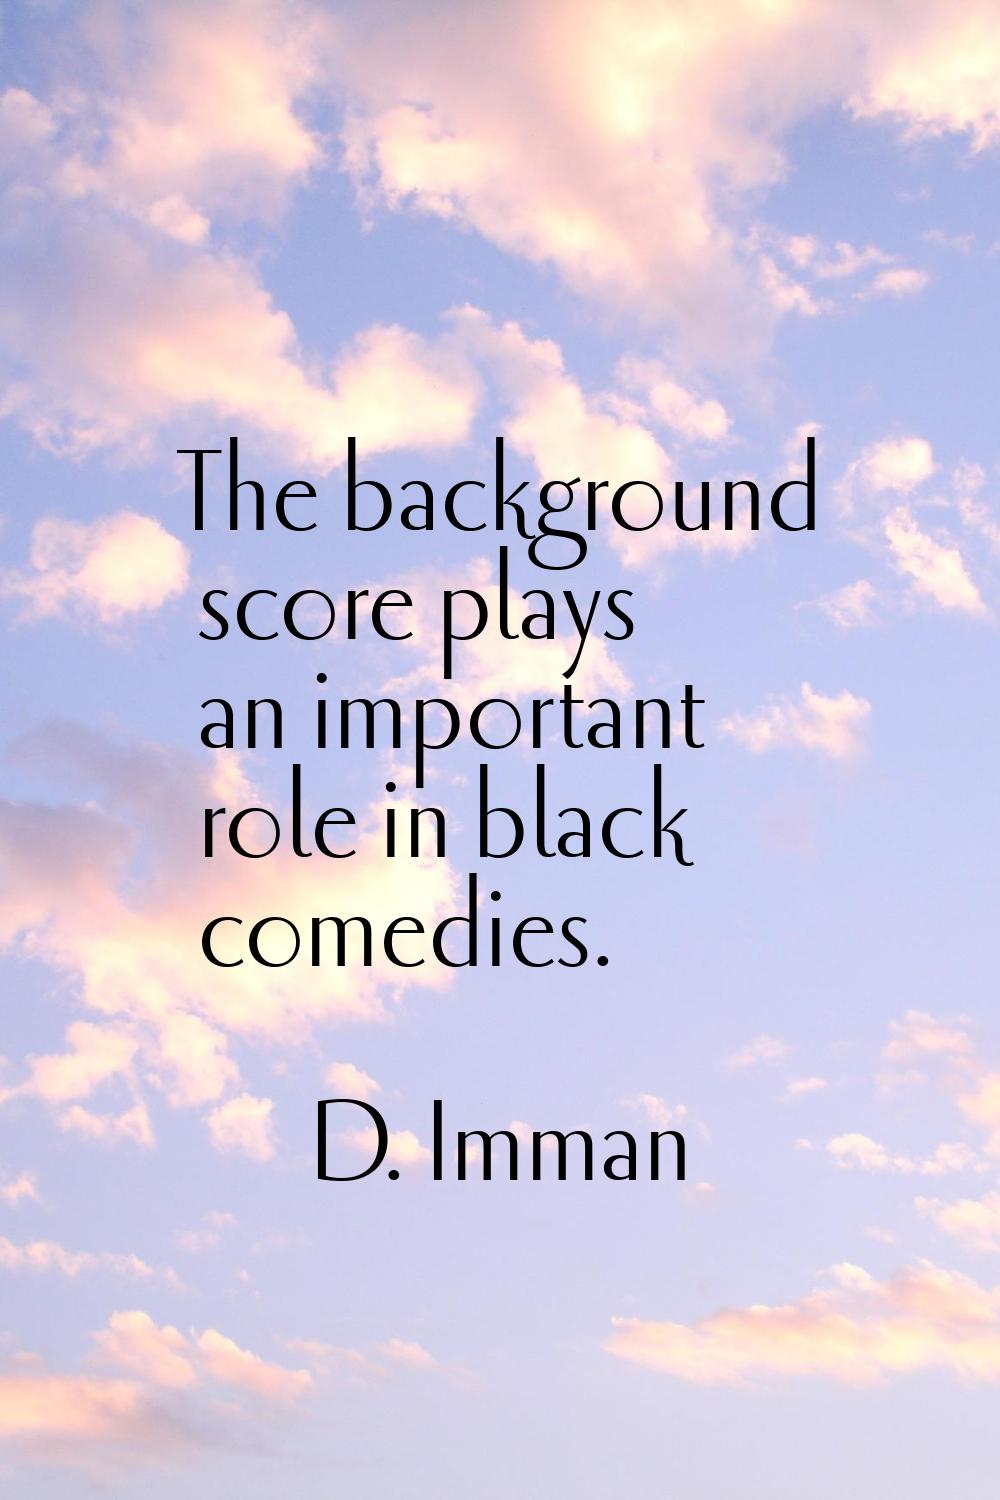 The background score plays an important role in black comedies.